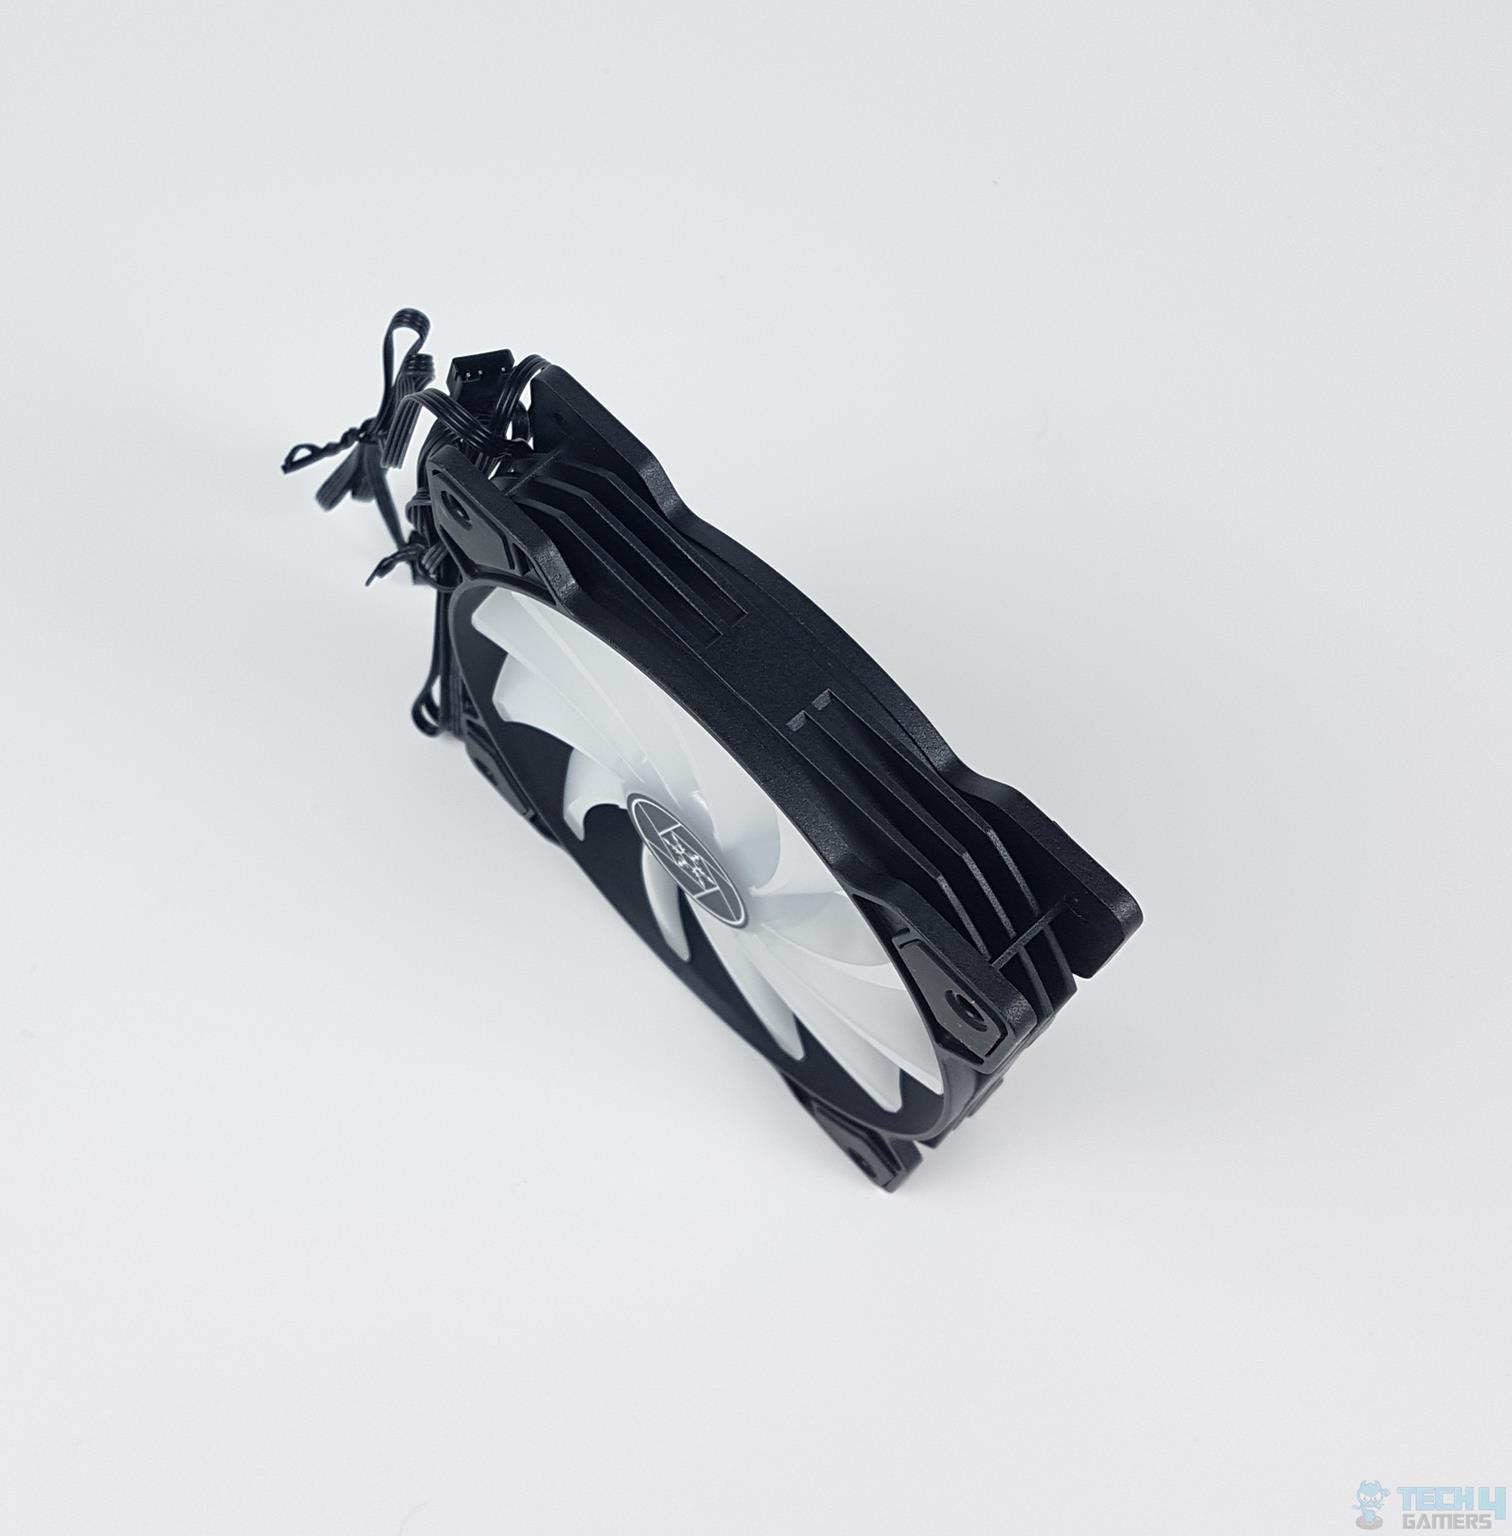 SilverStone iCEGEM 360 Liquid Cooler — The frame of the fan